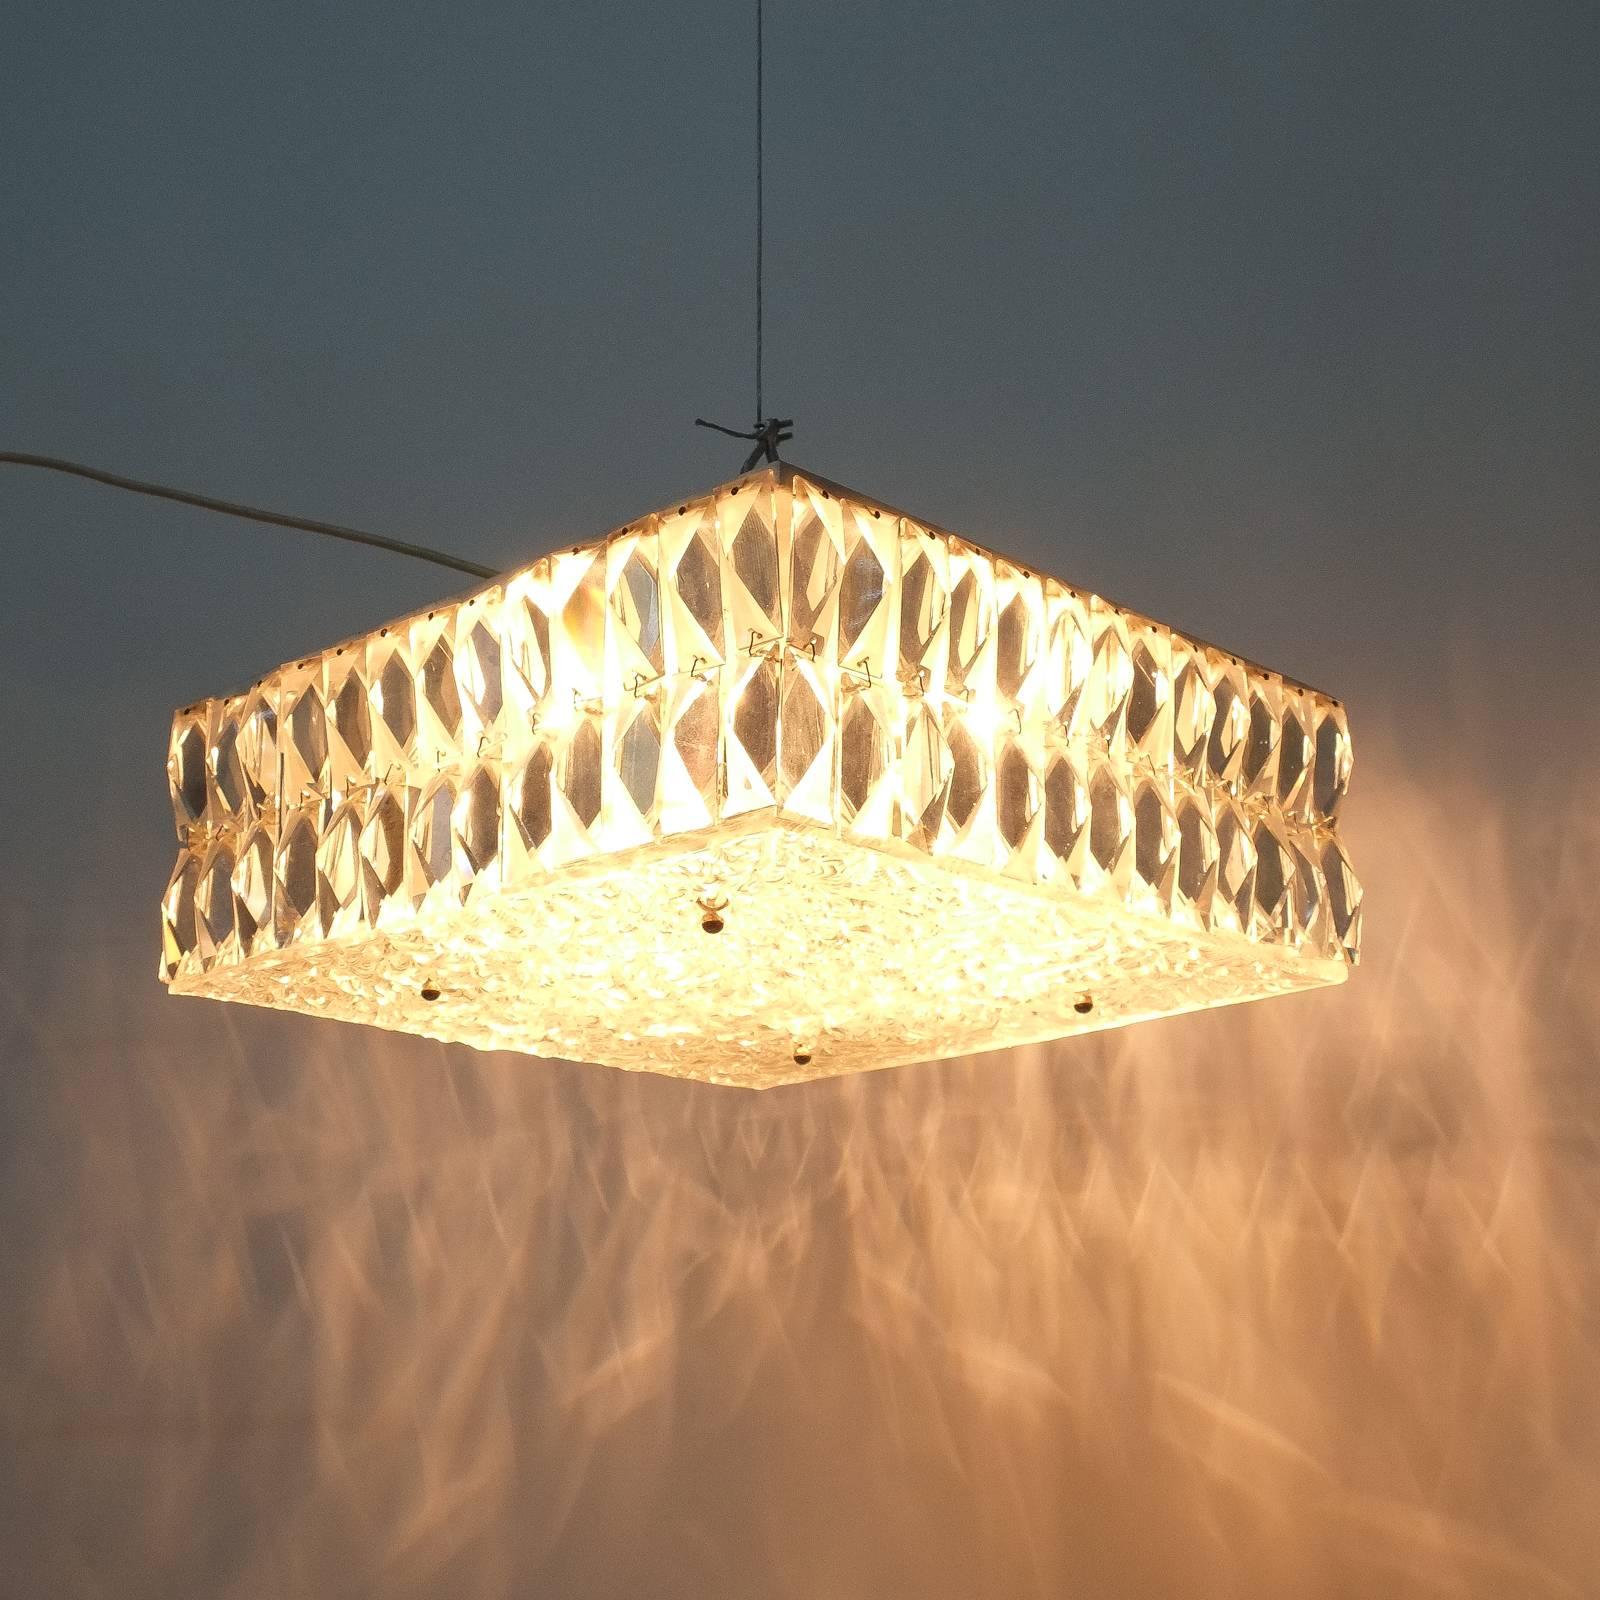 Exquisite ceiling fixture by J.T Kalmar, Austria, 1960 composed of thick textured glass, cut baguette crystals and nickeled brass accents. The light holds 8 bulbs in total (small e14) Max wattage per bulb is 40W. It's in excellent refurbished